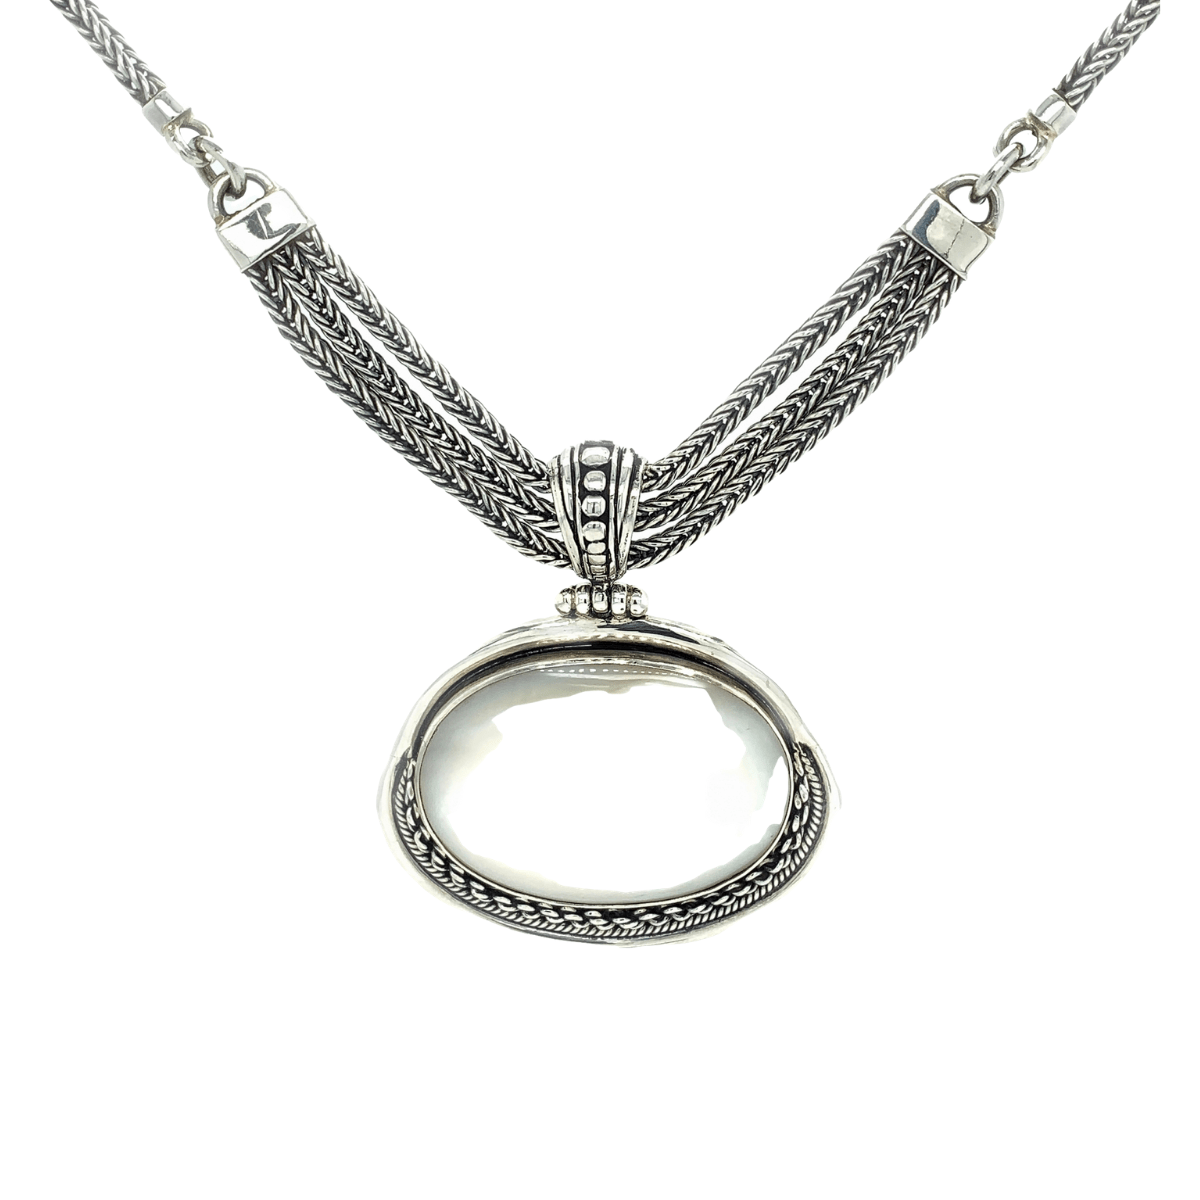 Large Mother-of-Pearl Medallion & Sterling Silver Necklace - Qinti - The Peruvian Shop